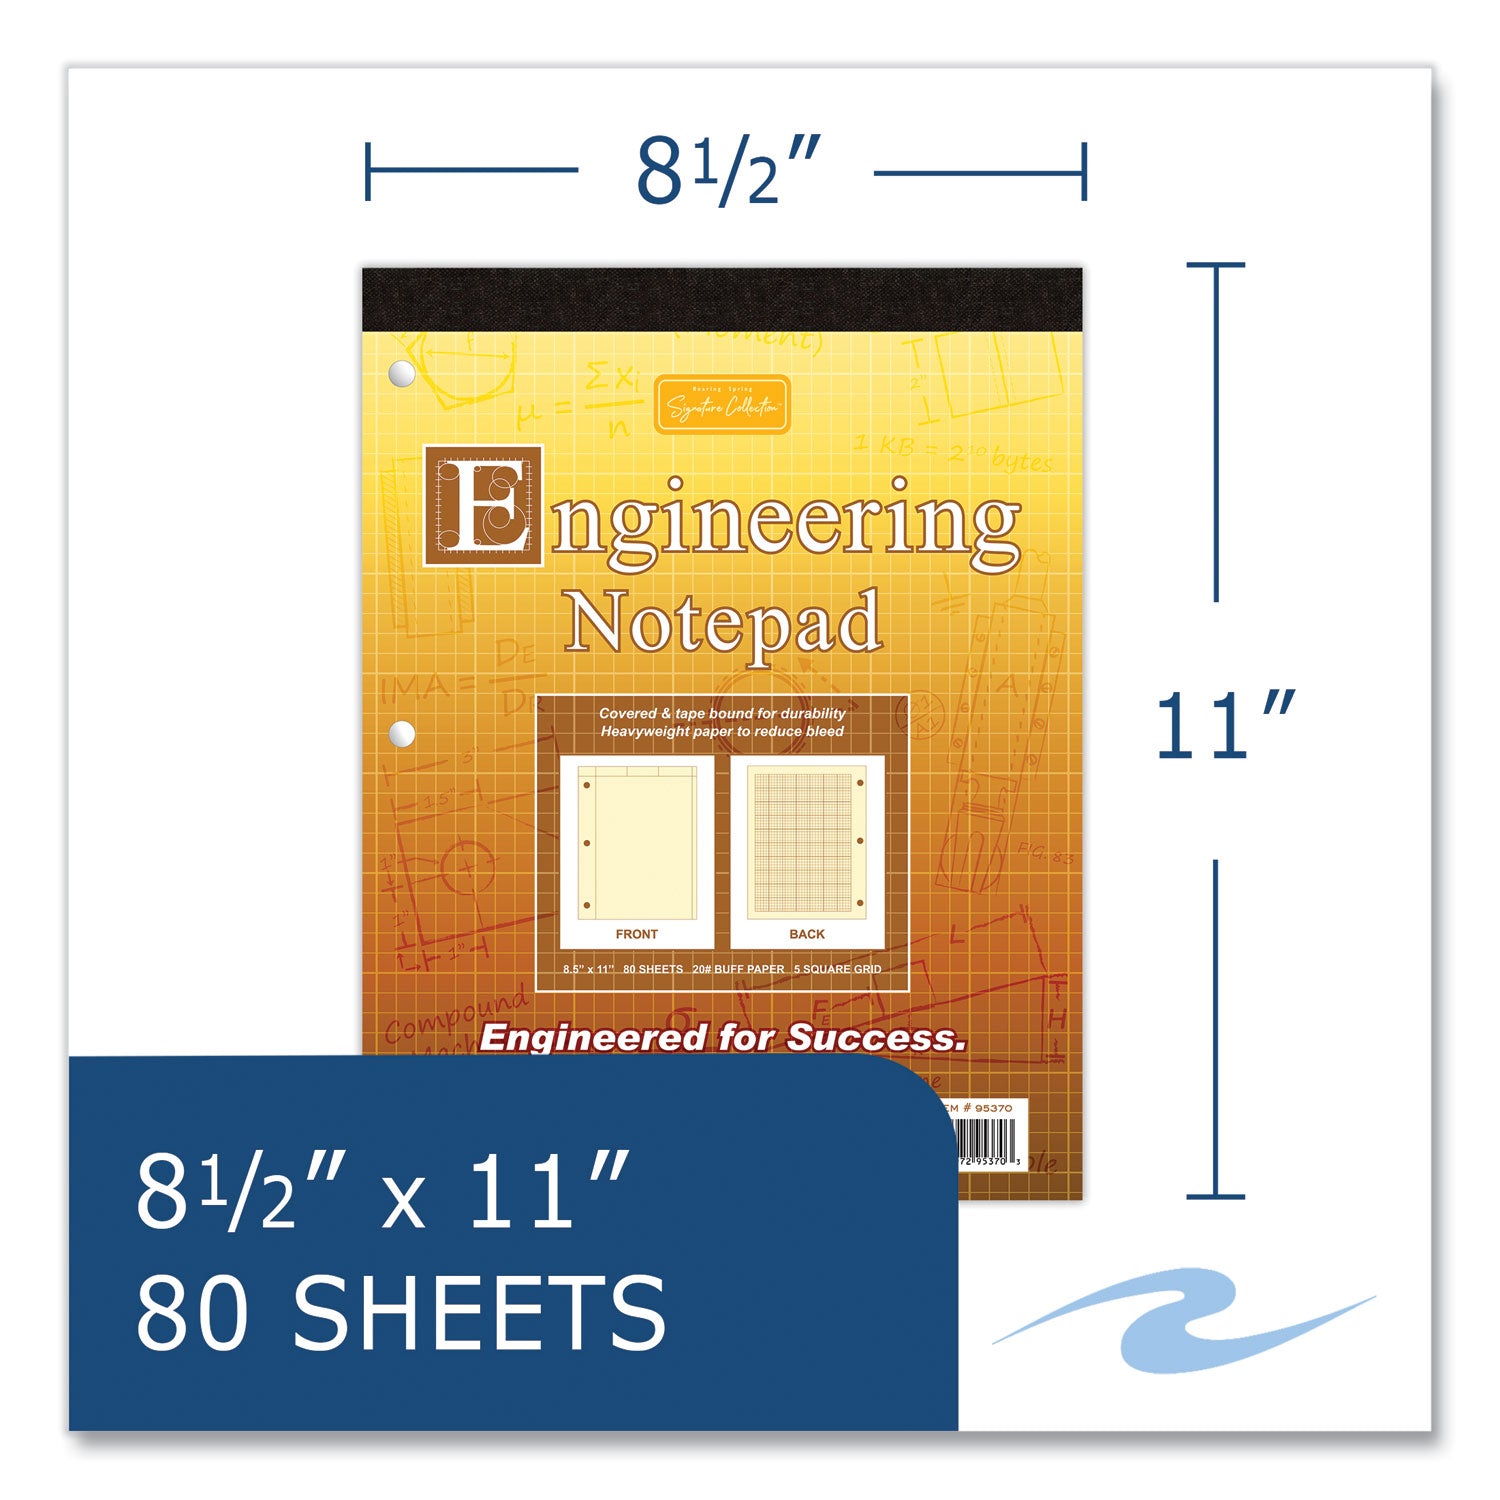 covered-engineering-pad-5-sq-in-quadrille-rule-80-buff-85-x-11-sheets-24-carton-ships-in-4-6-business-days_roa95370cs - 4